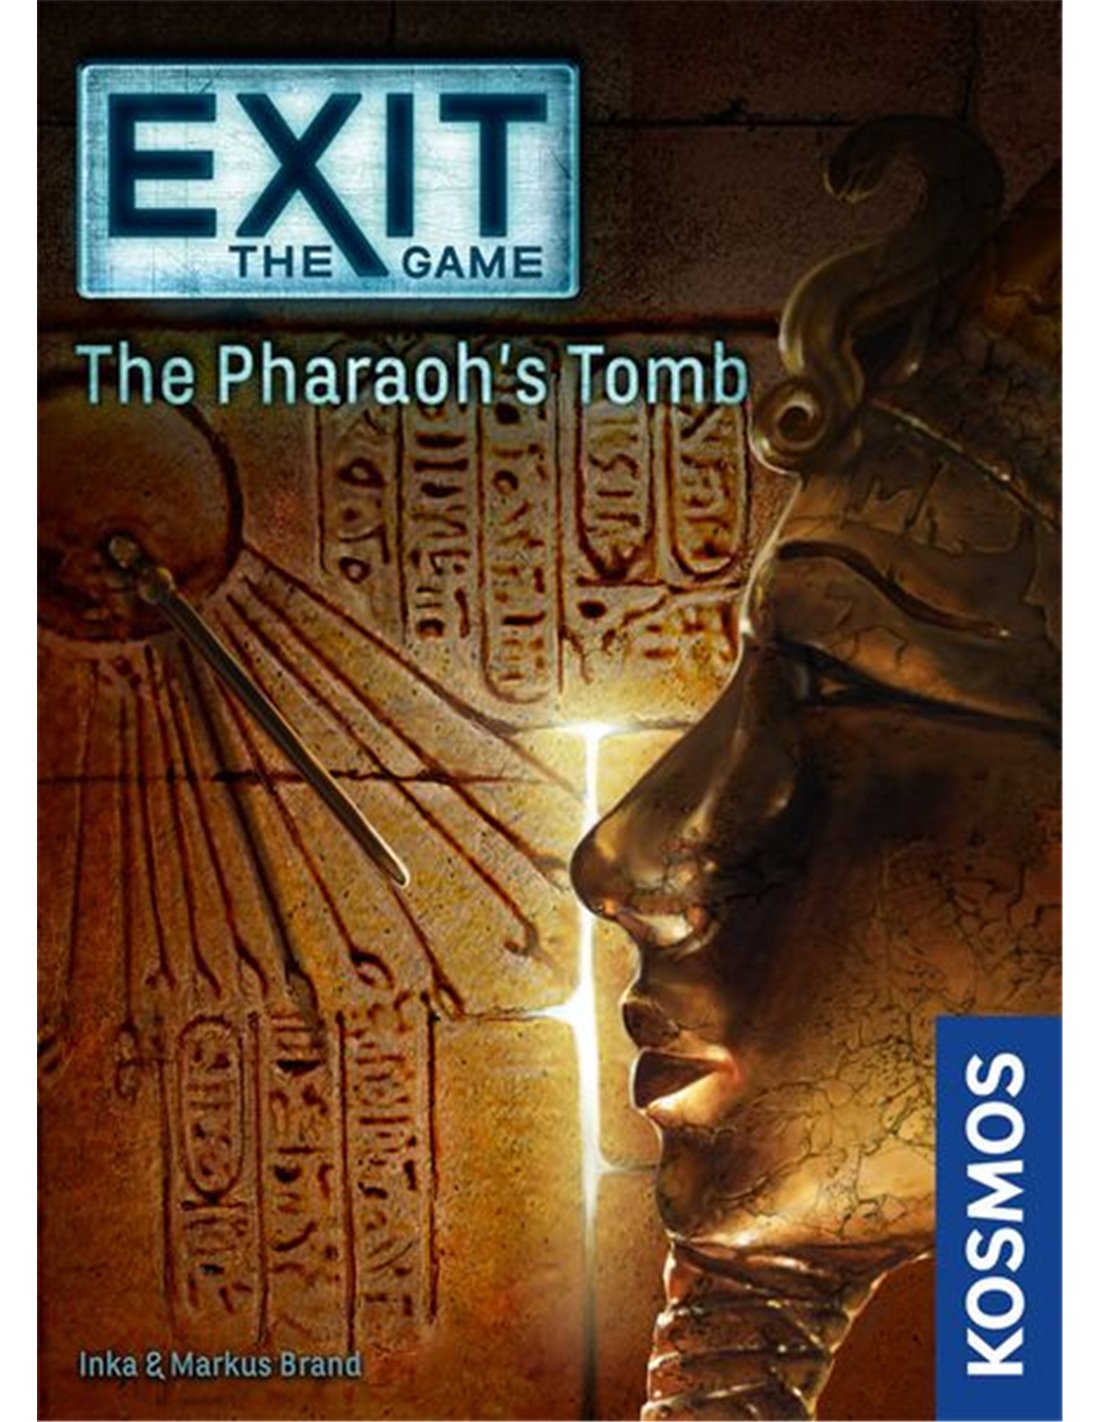 Exit: The Game - The Pharaoh's Tomb